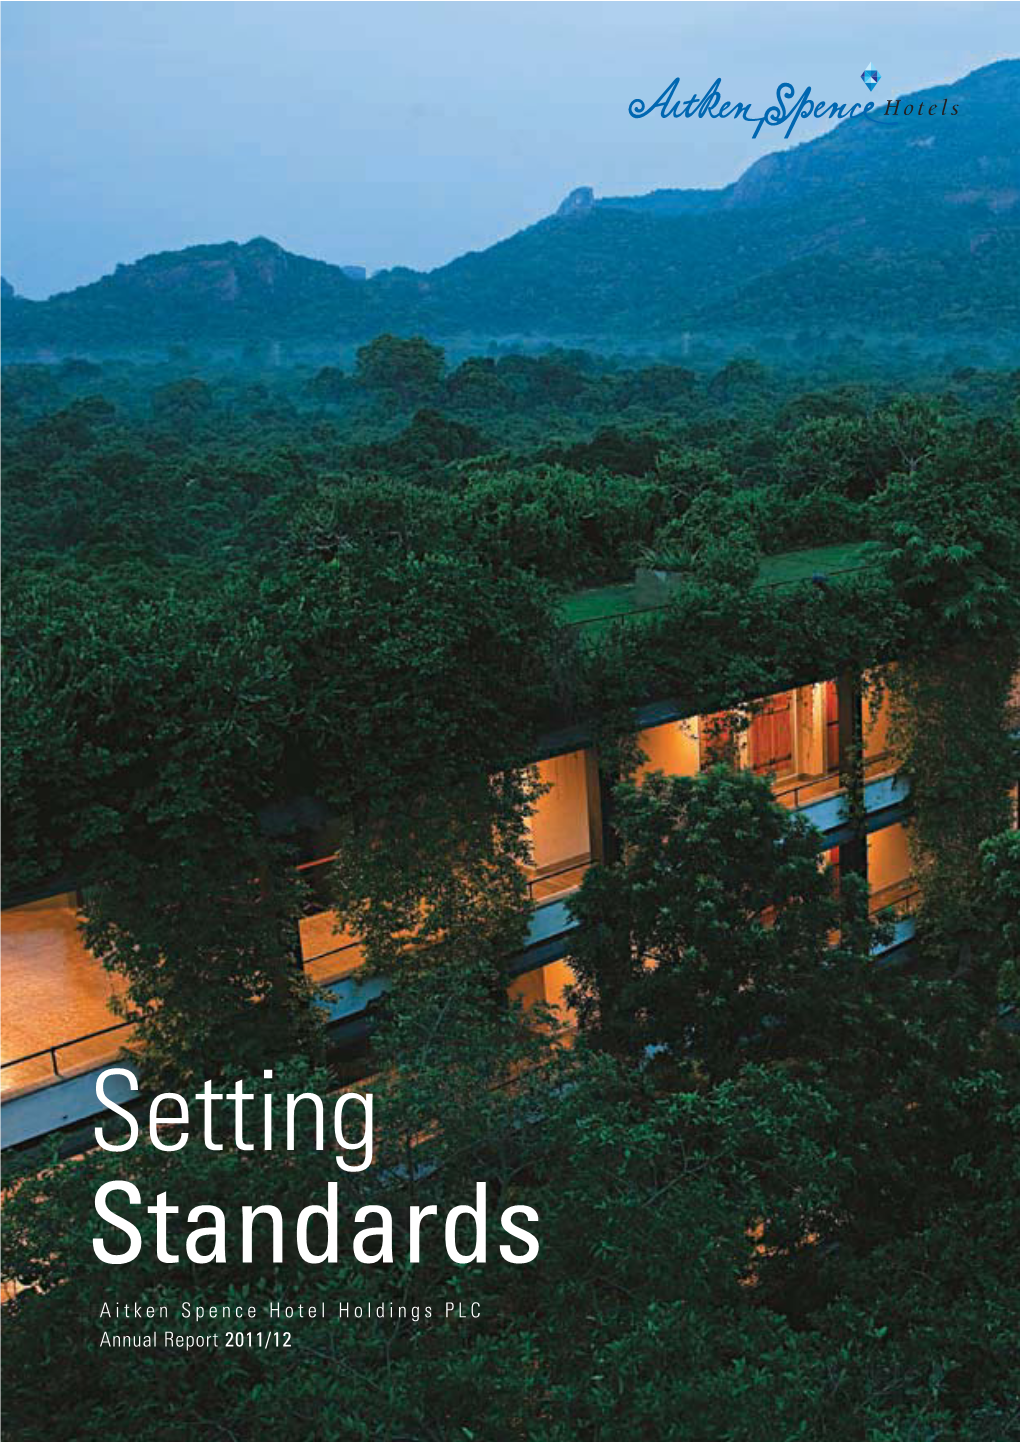 Setting Standards Aitken Spence Hotel Holdings PLC Annual Report 2011/12 Contents